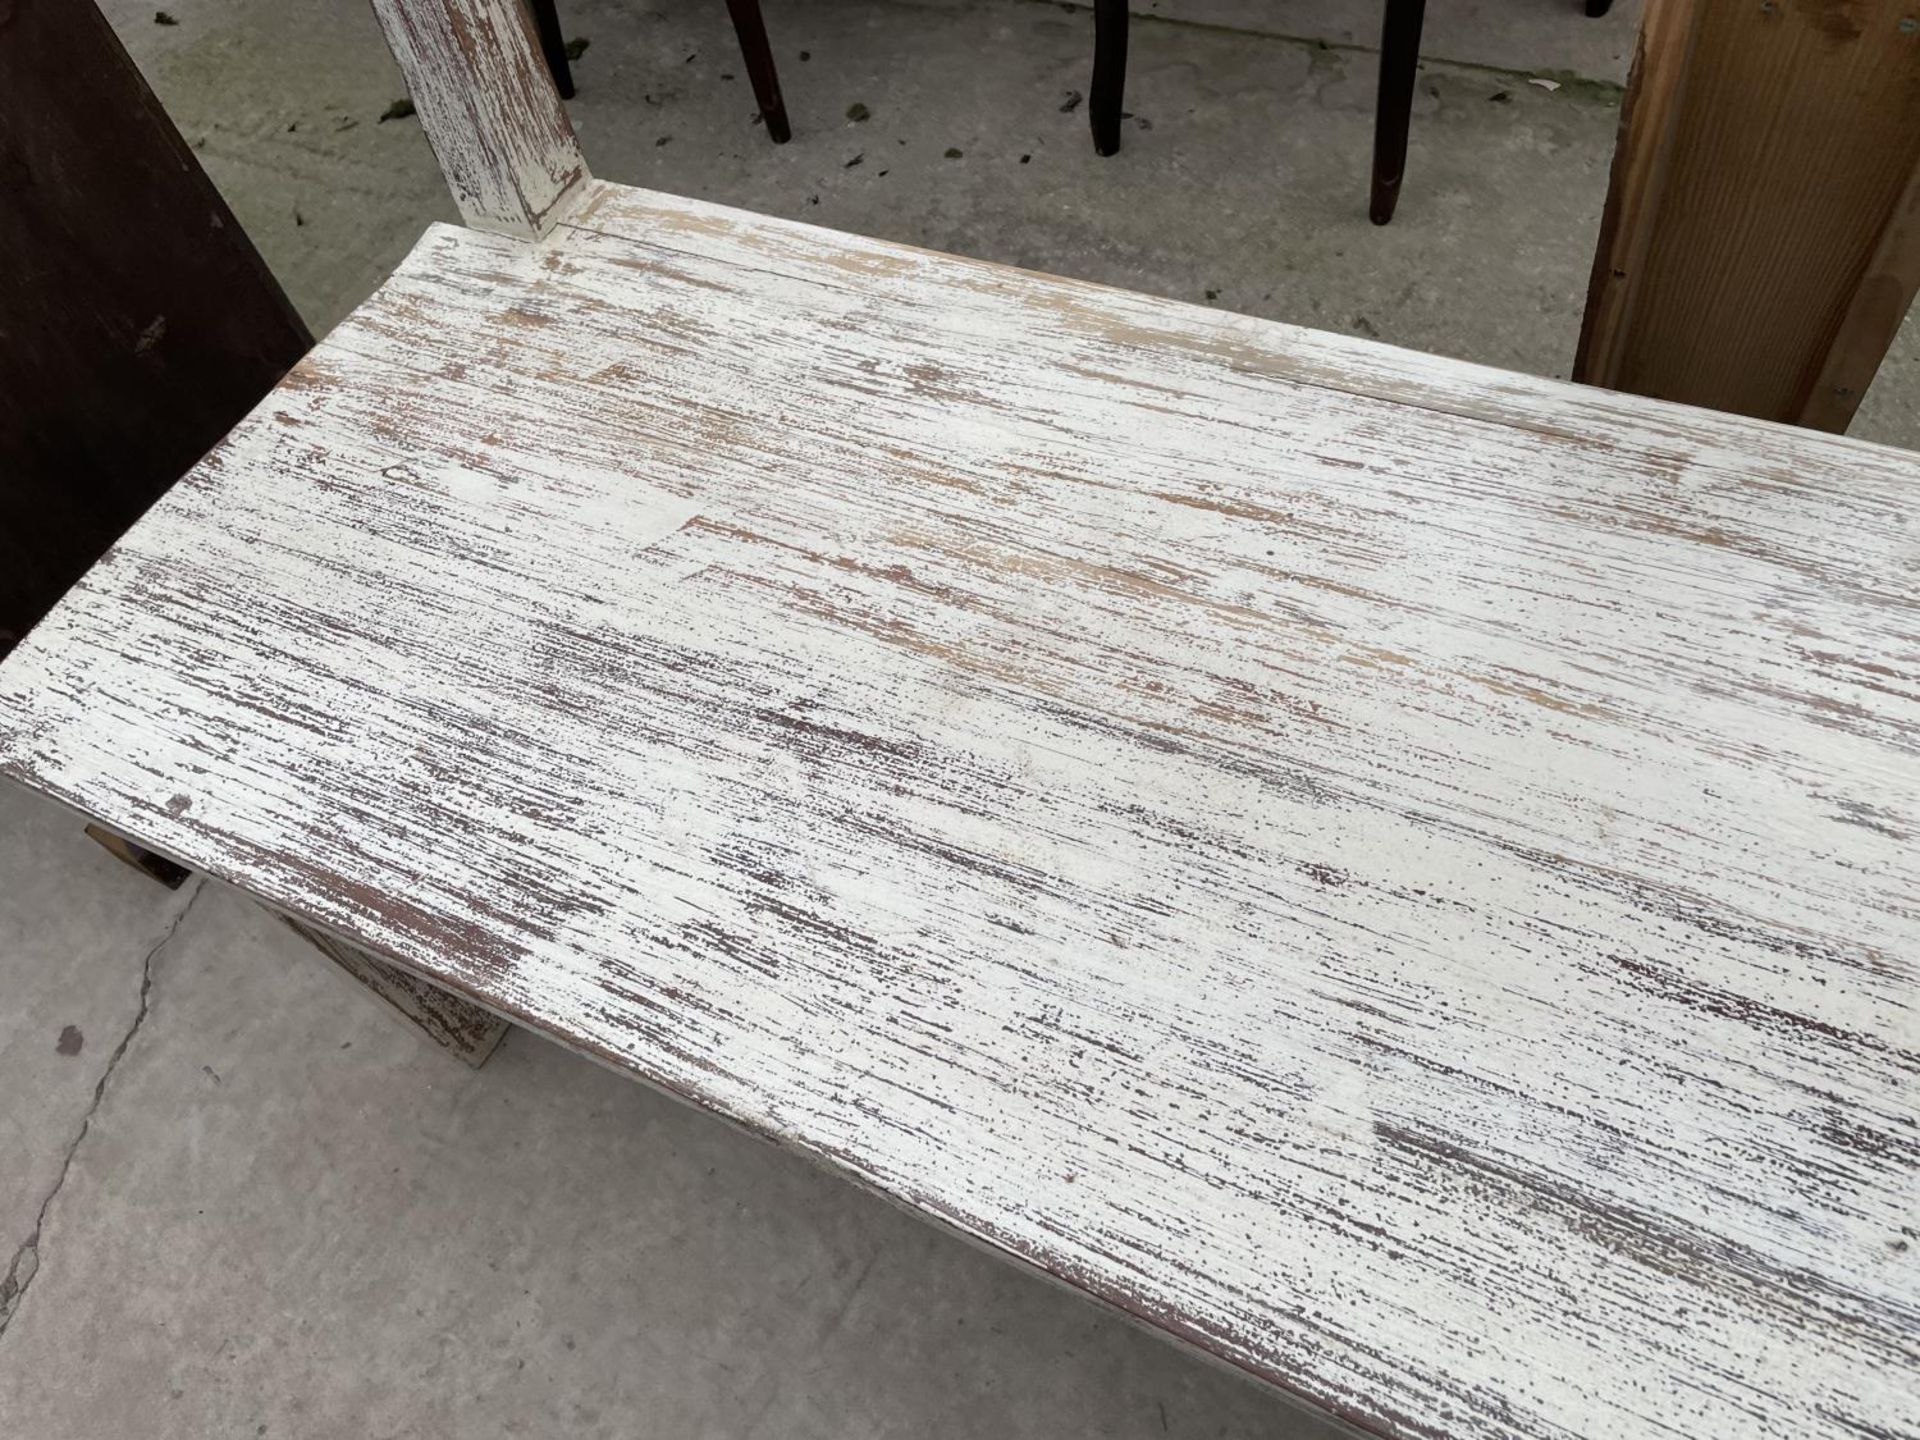 A SHABBY CHIC PAINTED BENCH - Image 3 of 4